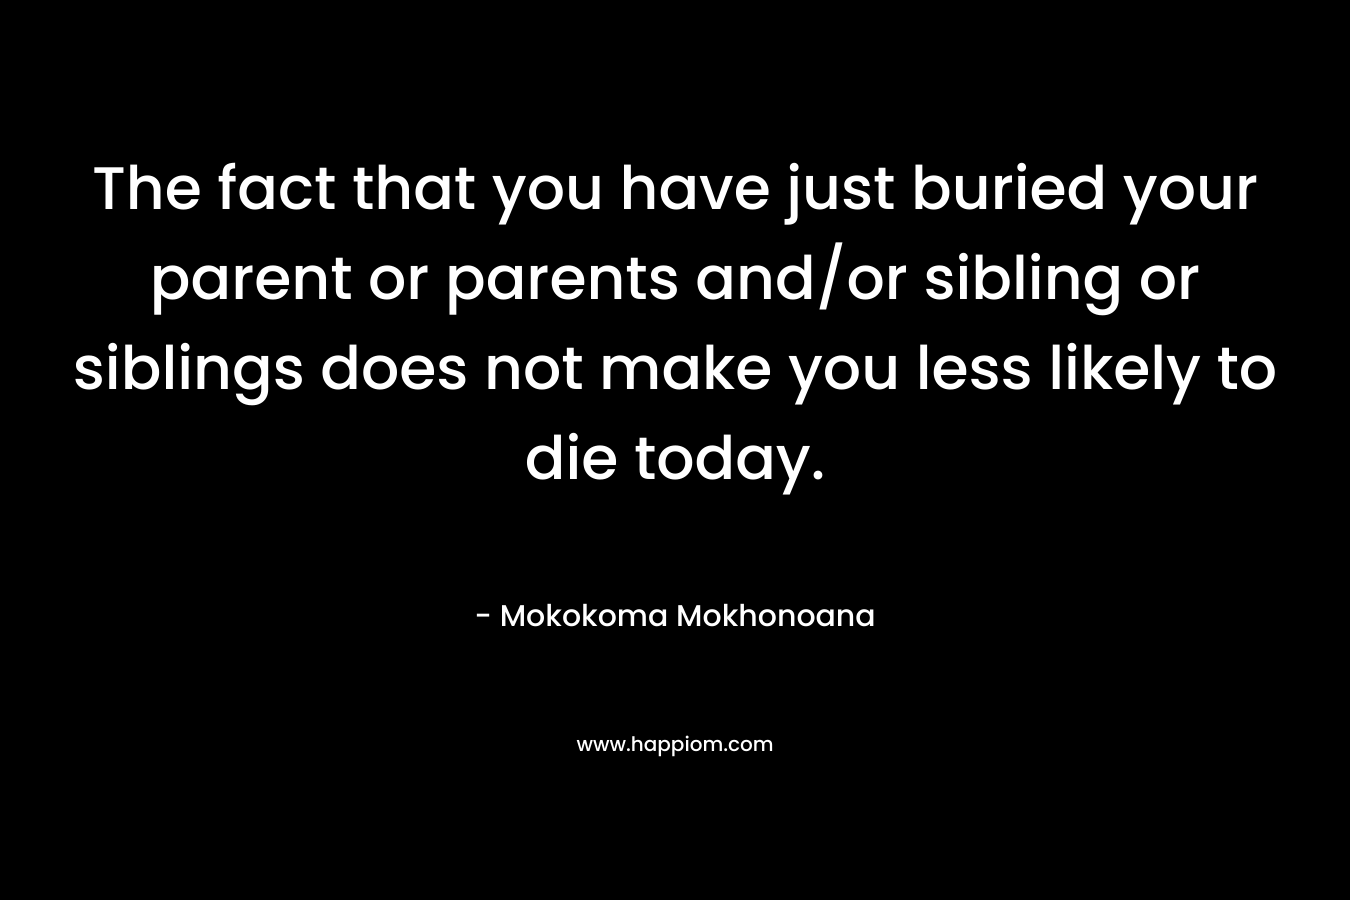 The fact that you have just buried your parent or parents and/or sibling or siblings does not make you less likely to die today. – Mokokoma Mokhonoana